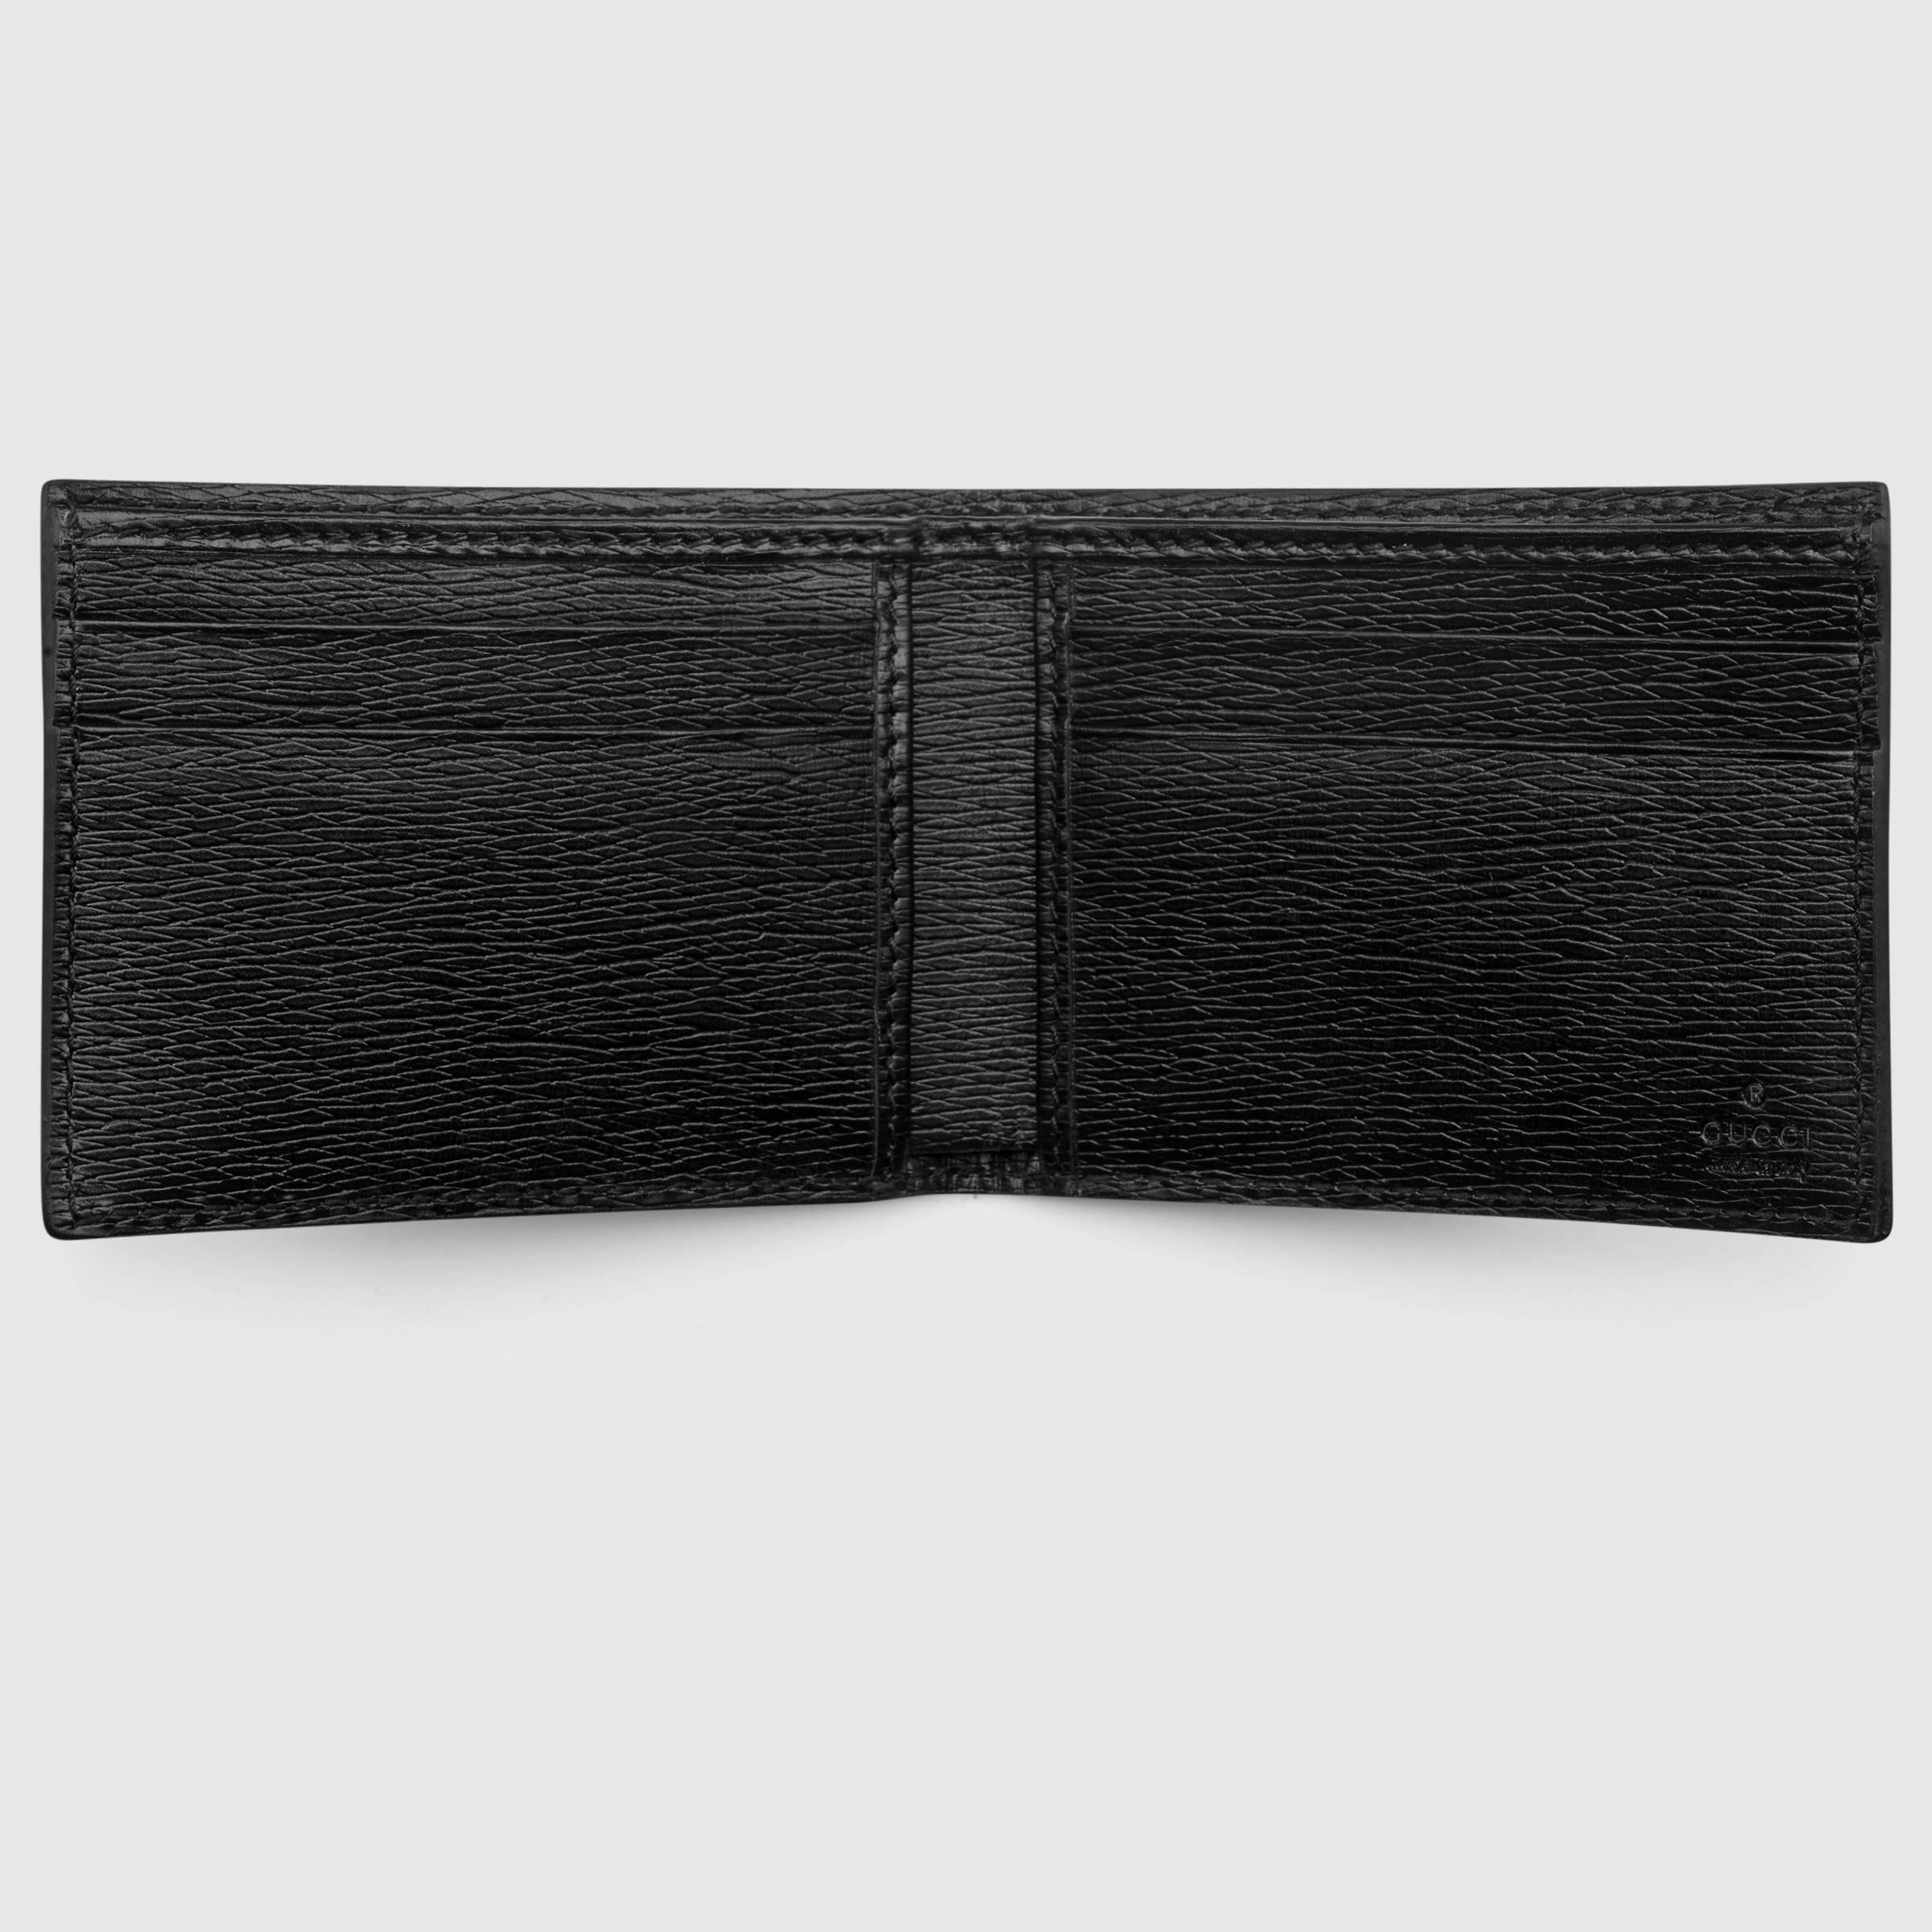 Gucci Snake Print Leather Wallet in Black for Men - Lyst